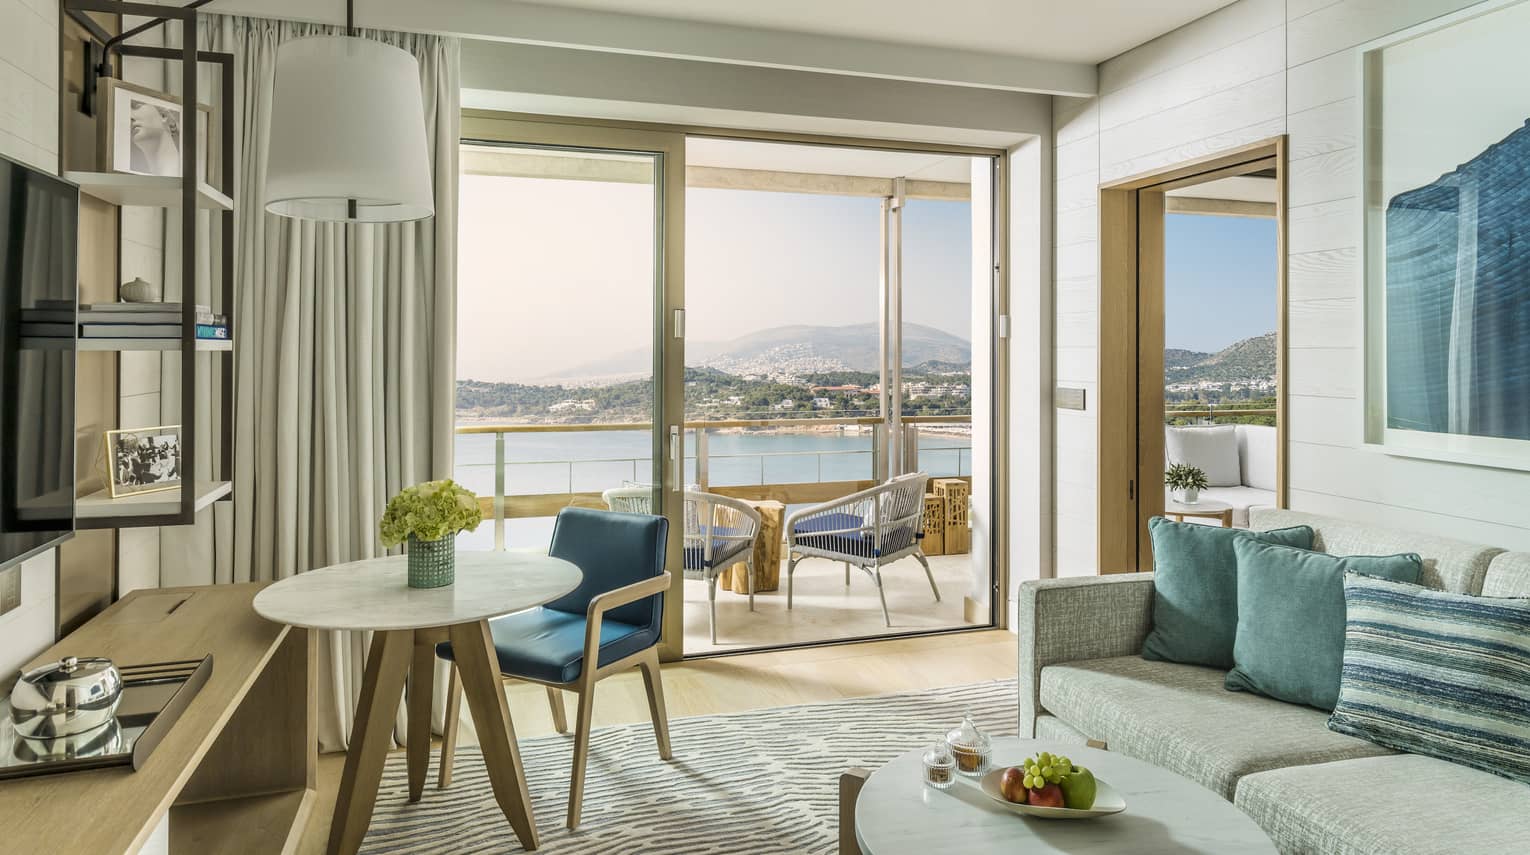 Suite with cream sofa, blue accent pillows and wall art, oval coffee table, round table for one, sliding glass doors leading to balcony, ocean views